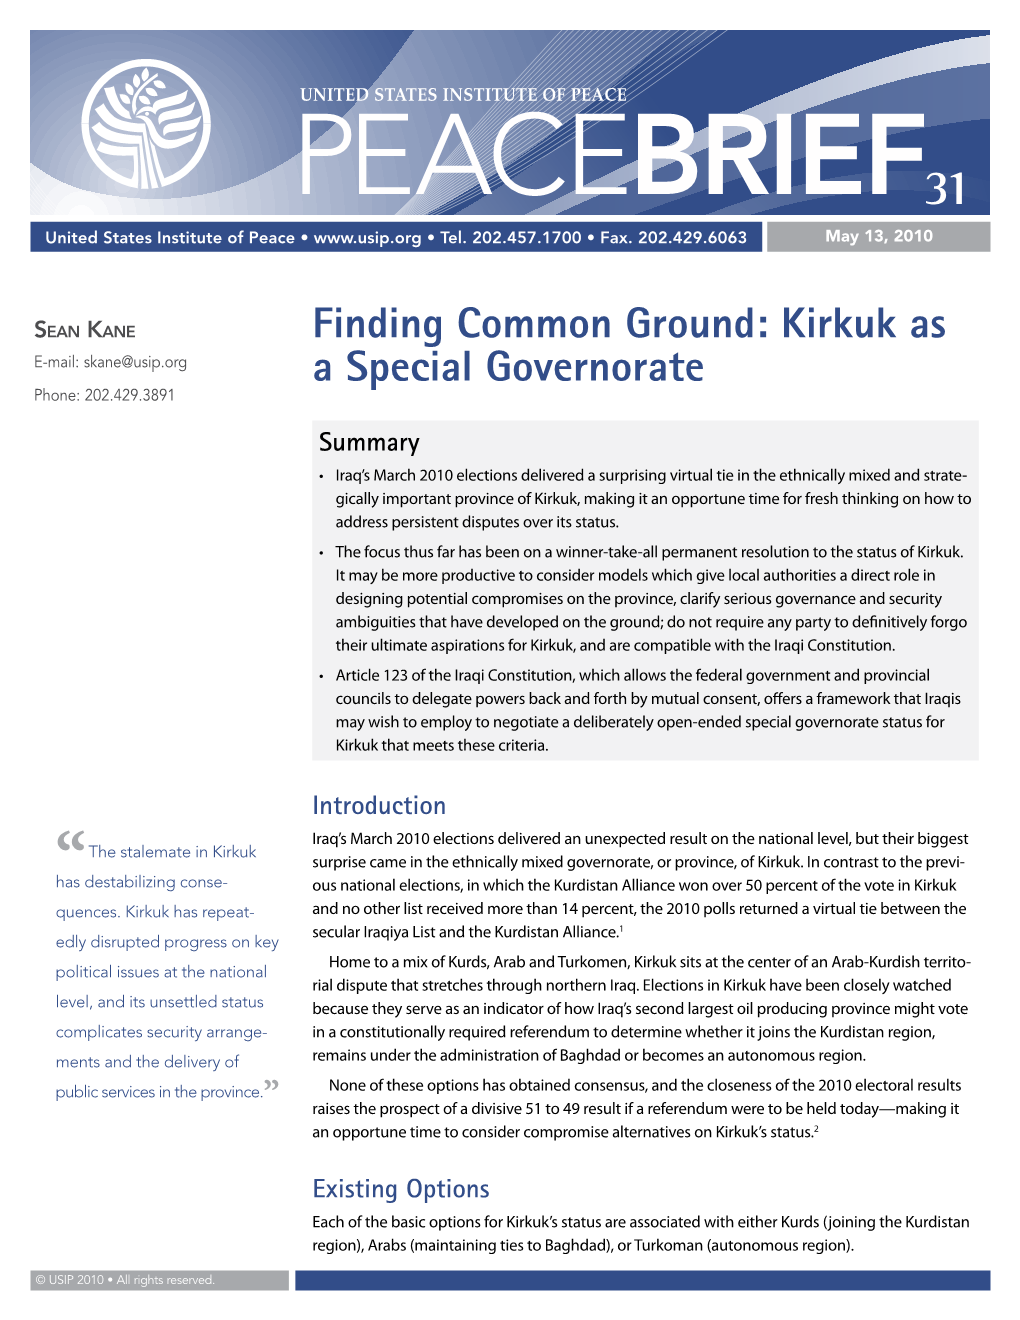 Finding Common Ground: Kirkuk As a Special Governorate